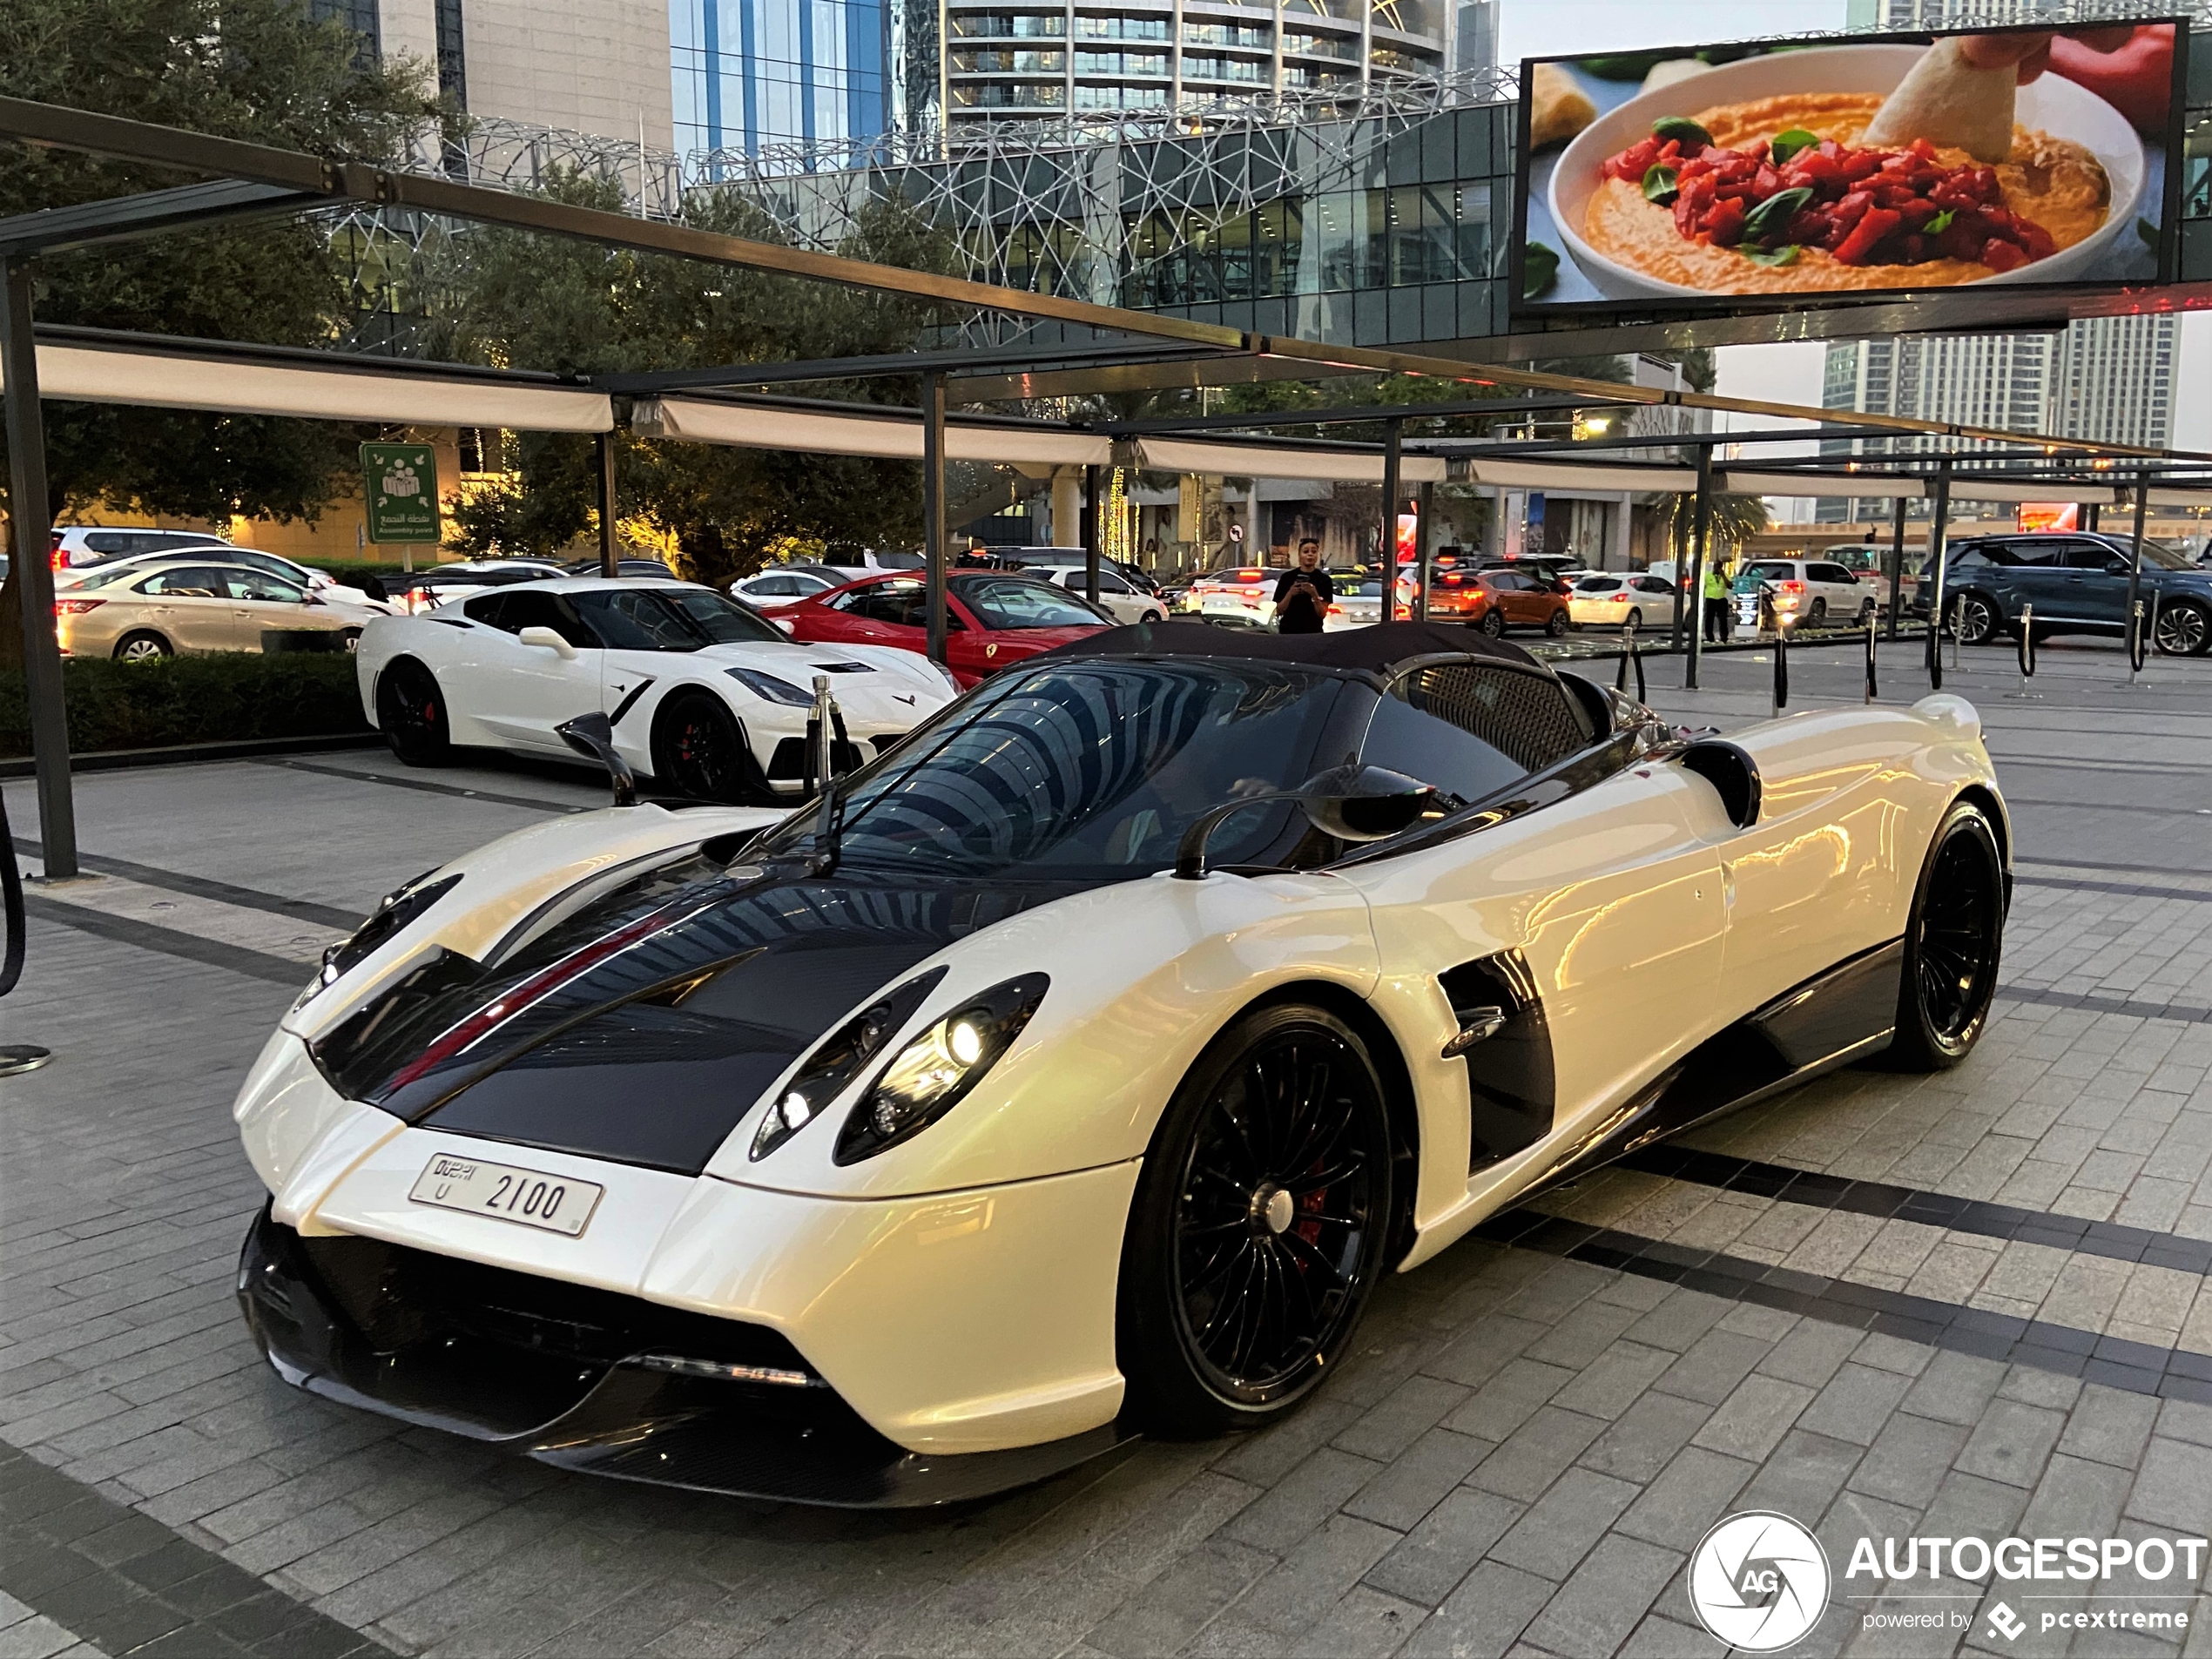 An exotic sight in front of Dubai's shopping mall